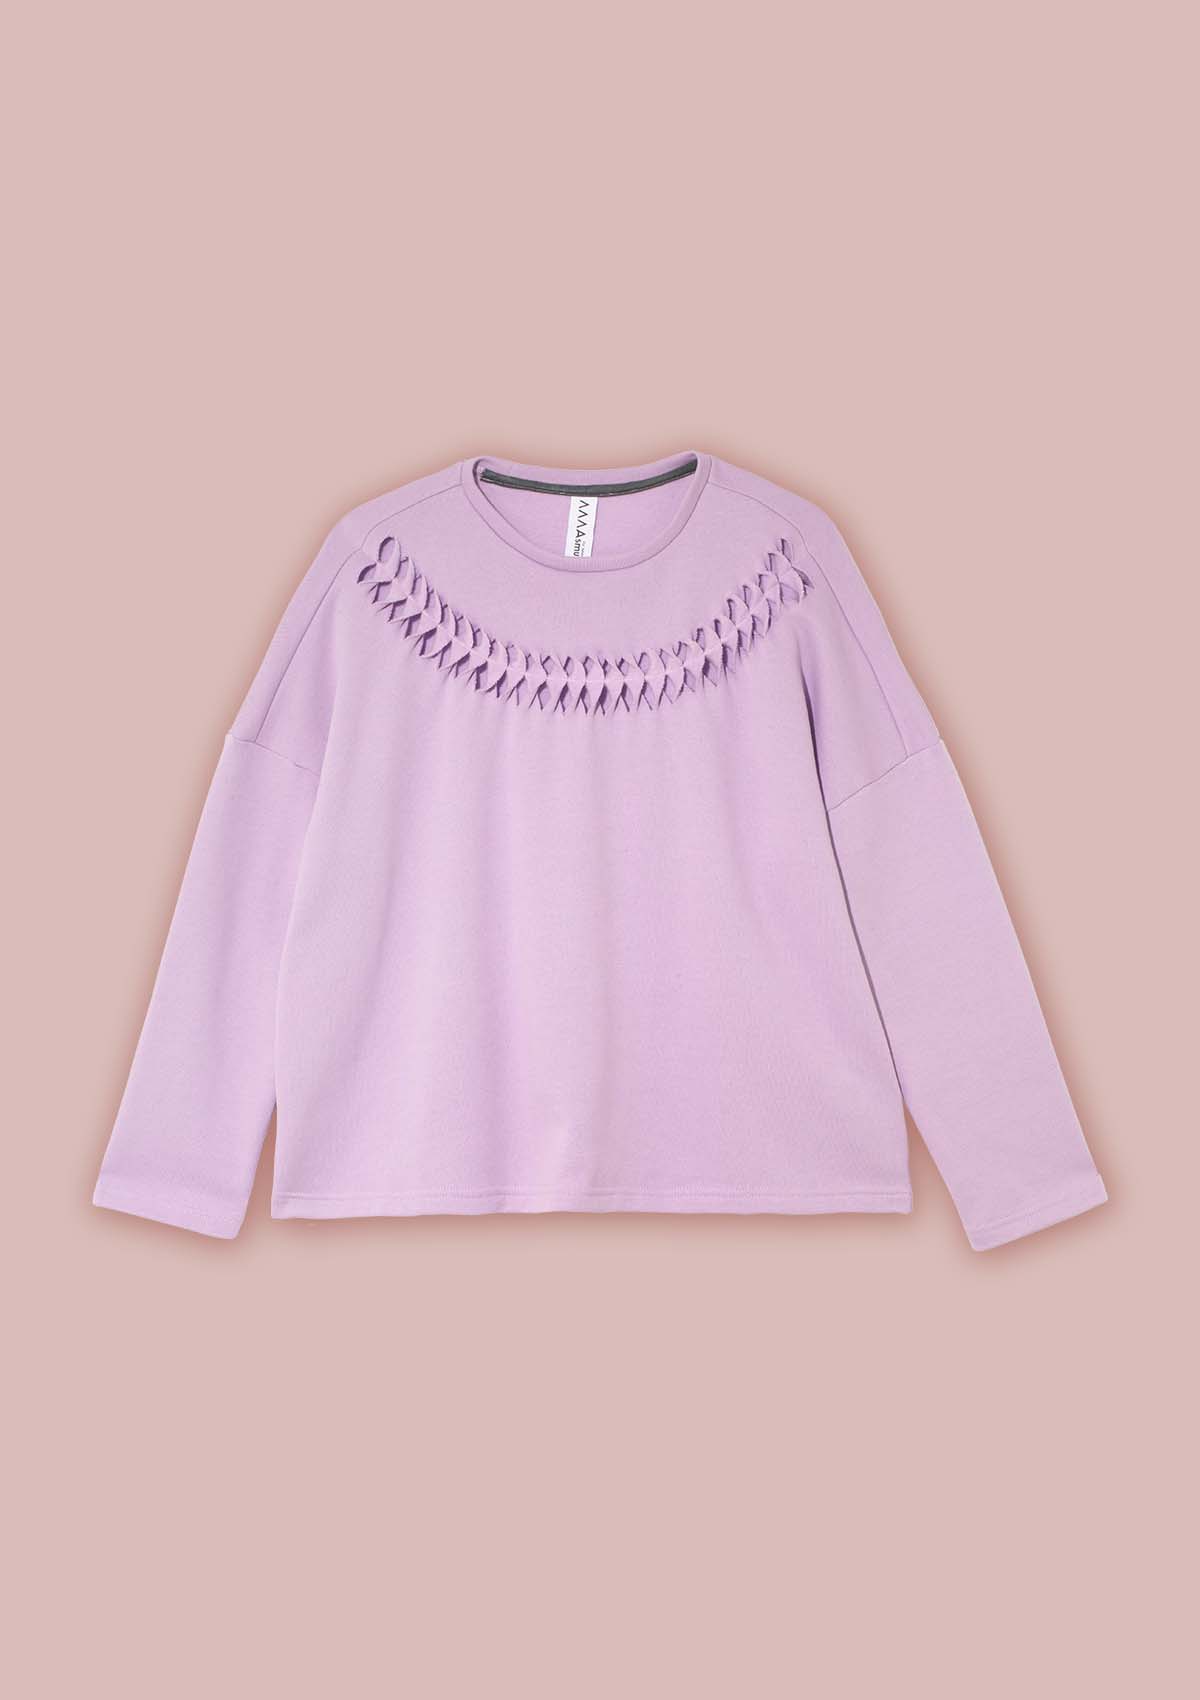 Flat front view of the Anni Sweatshirt with crew neck and long sleeves in Lilac with the twist and stitch detail